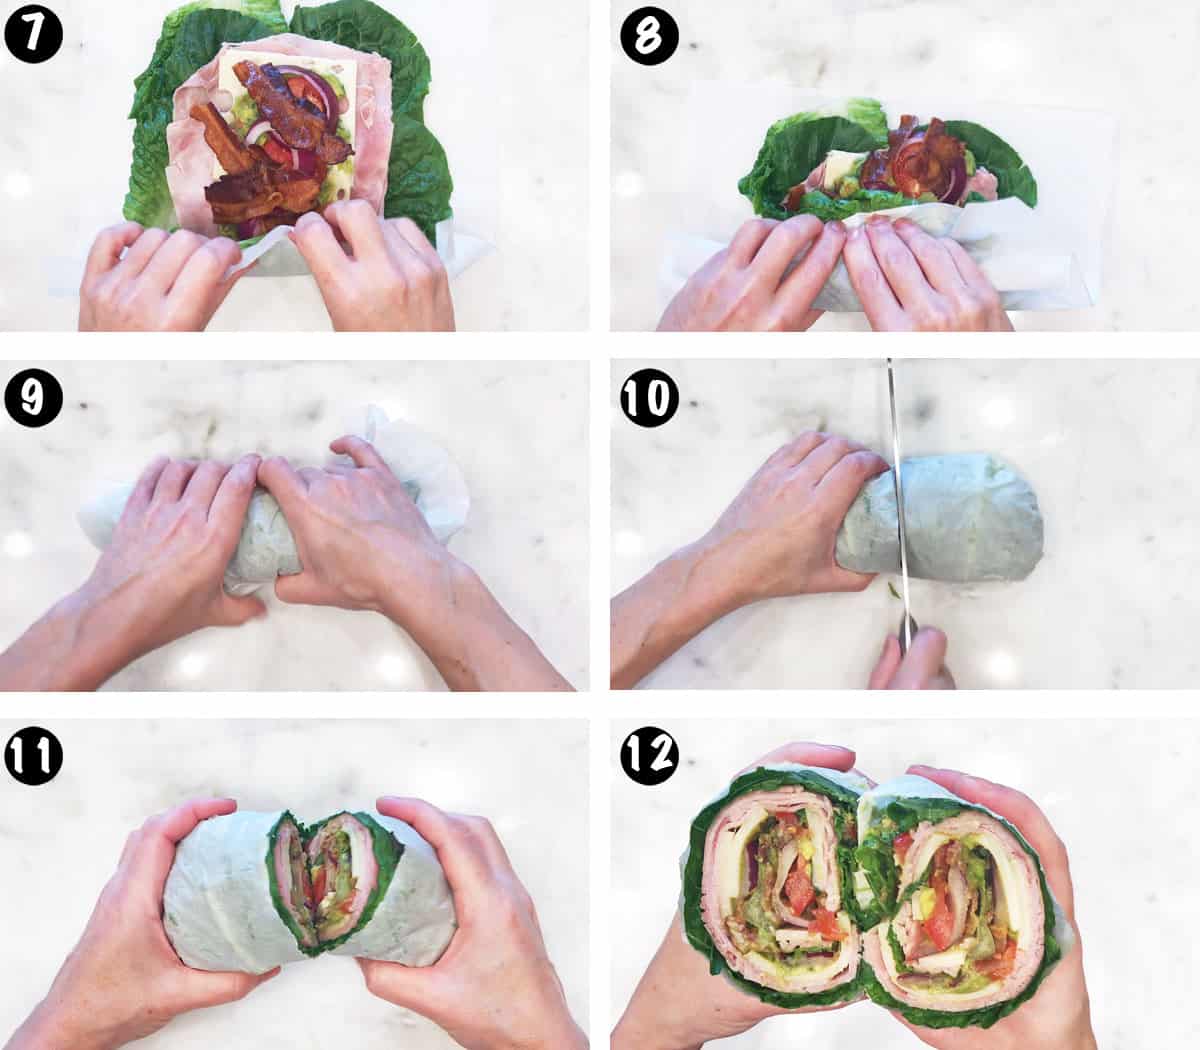 A photo collage showing steps 7-12 for making a lettuce sandwich. 